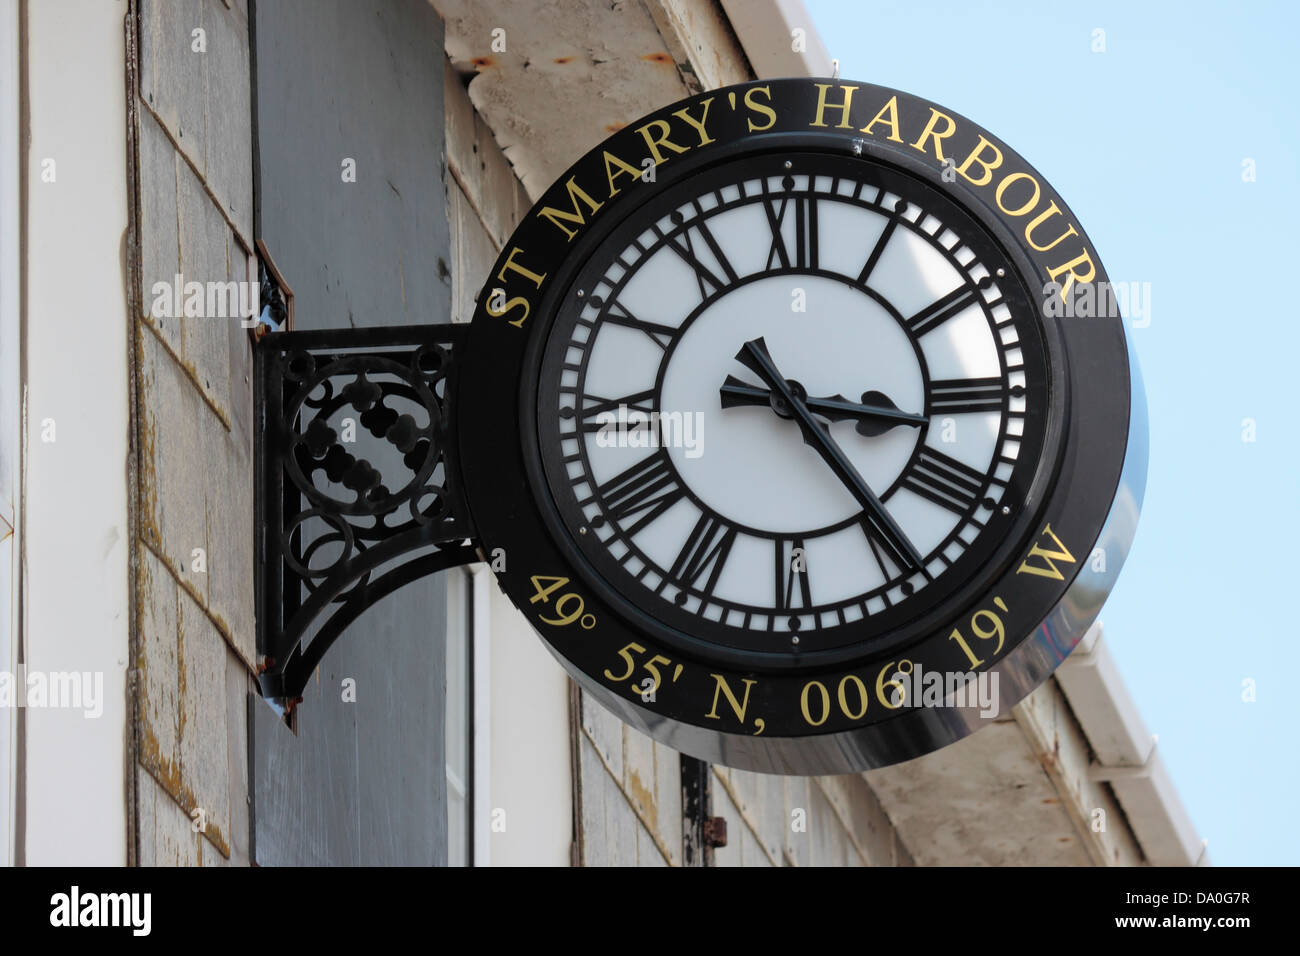 St Mary's Harbour Clock, Ilses of Scilly UK Stock Photo